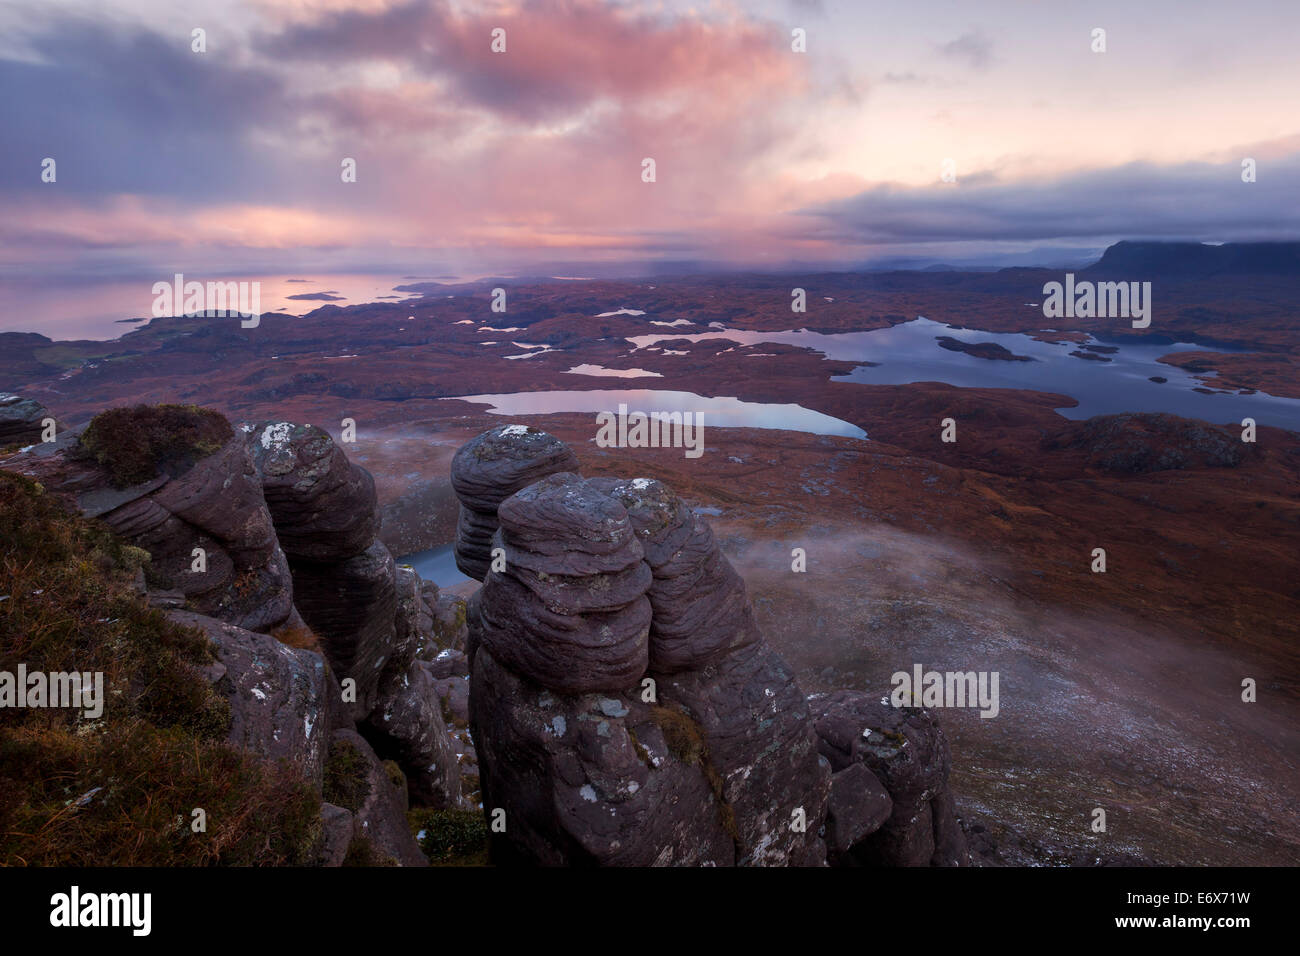 Sunrise with the view from Stac Pollaidh over the Inverpolly Nature Reserve with typical sandstone formations in the foreground, Stock Photo